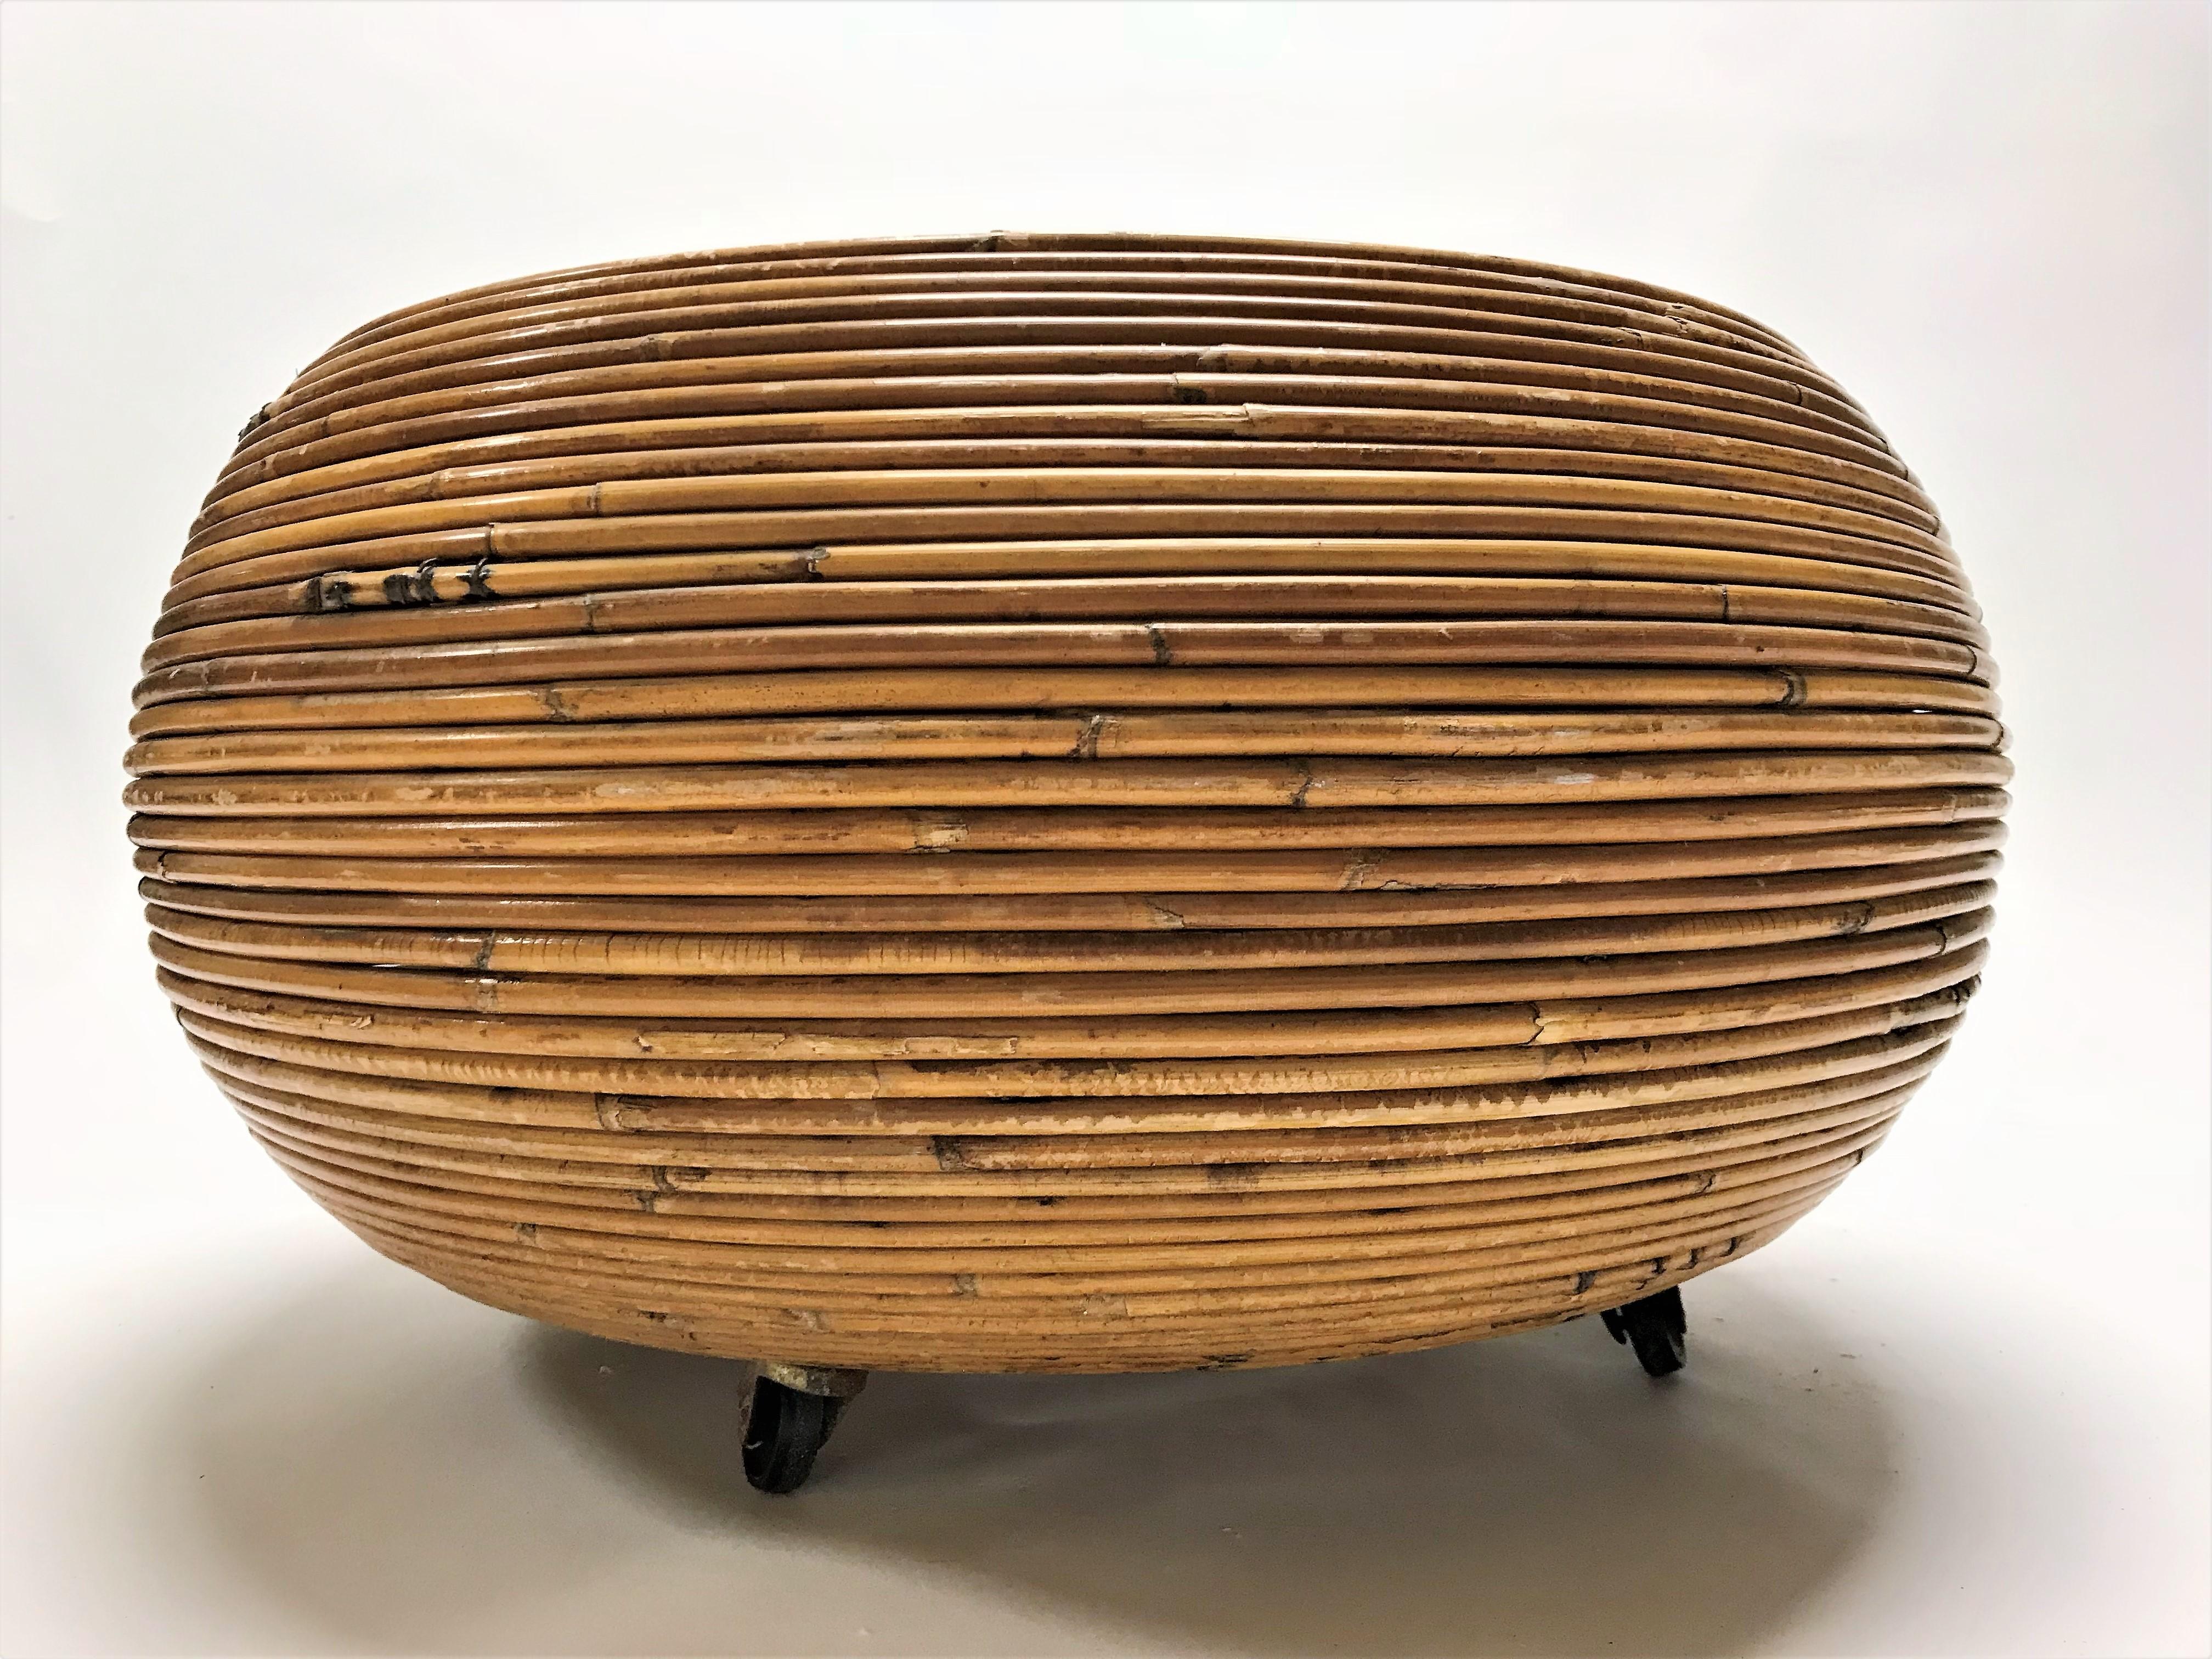 Pair of bamboo planters or baskets on brass casters in the style of Gabrielle Crespi.

These organic and useful pair of baskets show a beautiful wear.

These baskets can be used to store blankets, toys, and are very decorative.

Sold as a